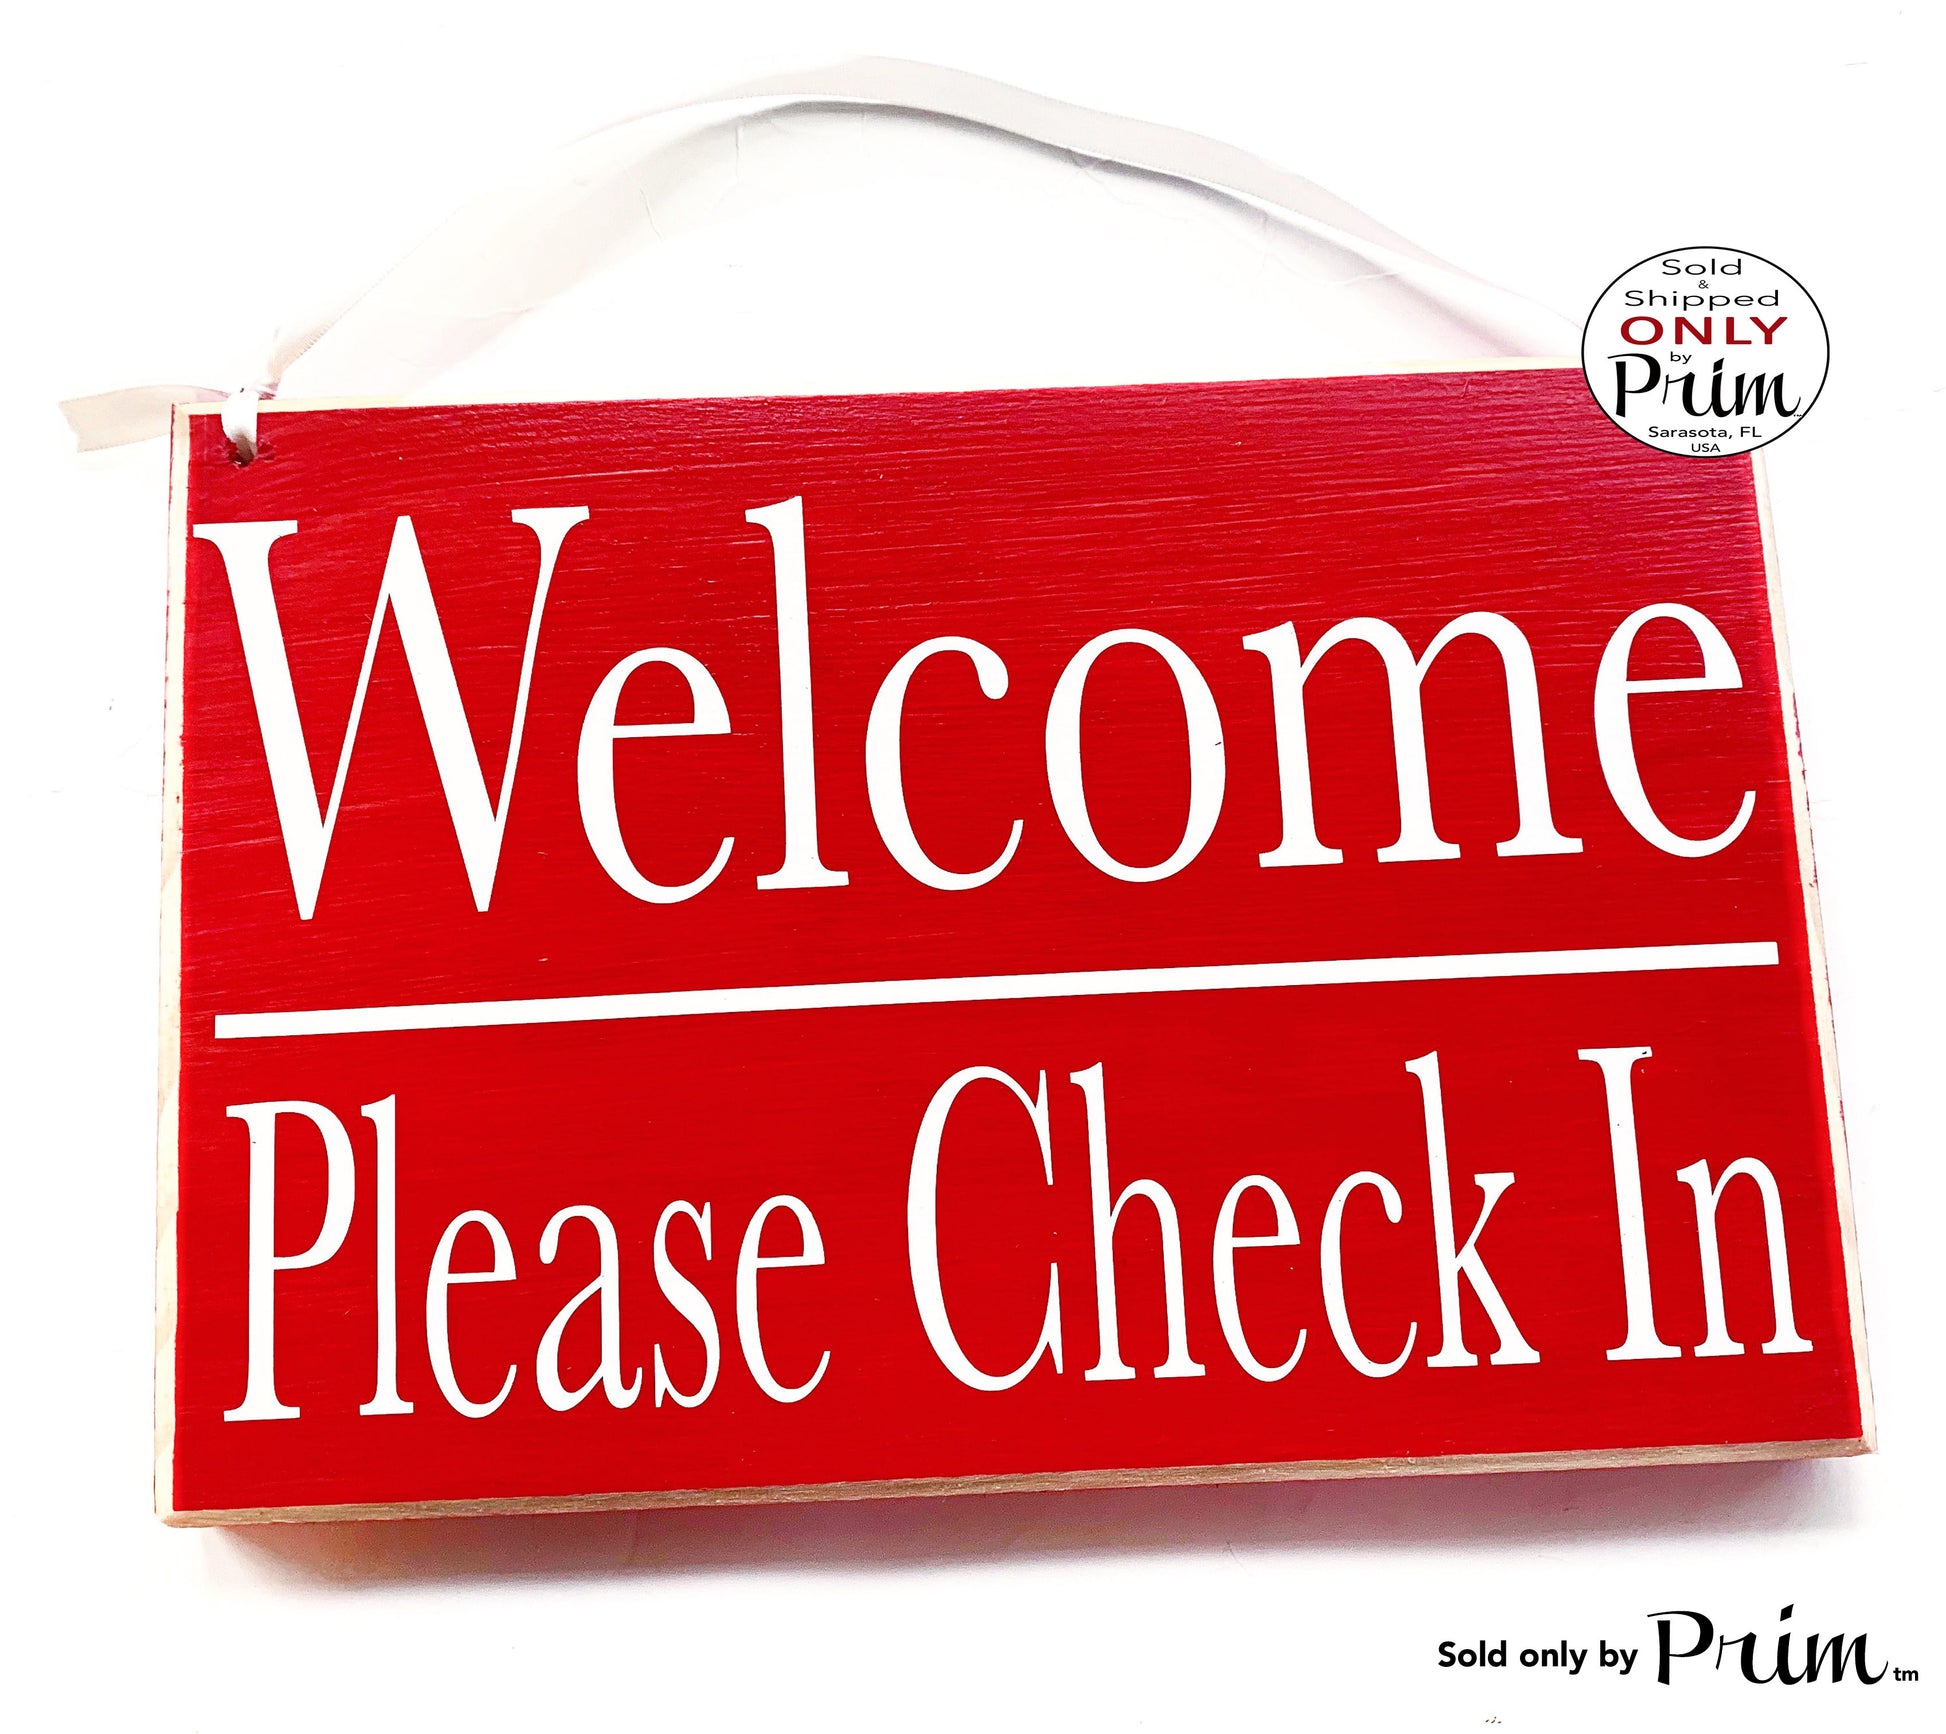 10x8 Welcome Please Check In Custom Wood Office Sign | Business Medical Salon Spa Service Counseling Welcome Appointment Open Door Plaque